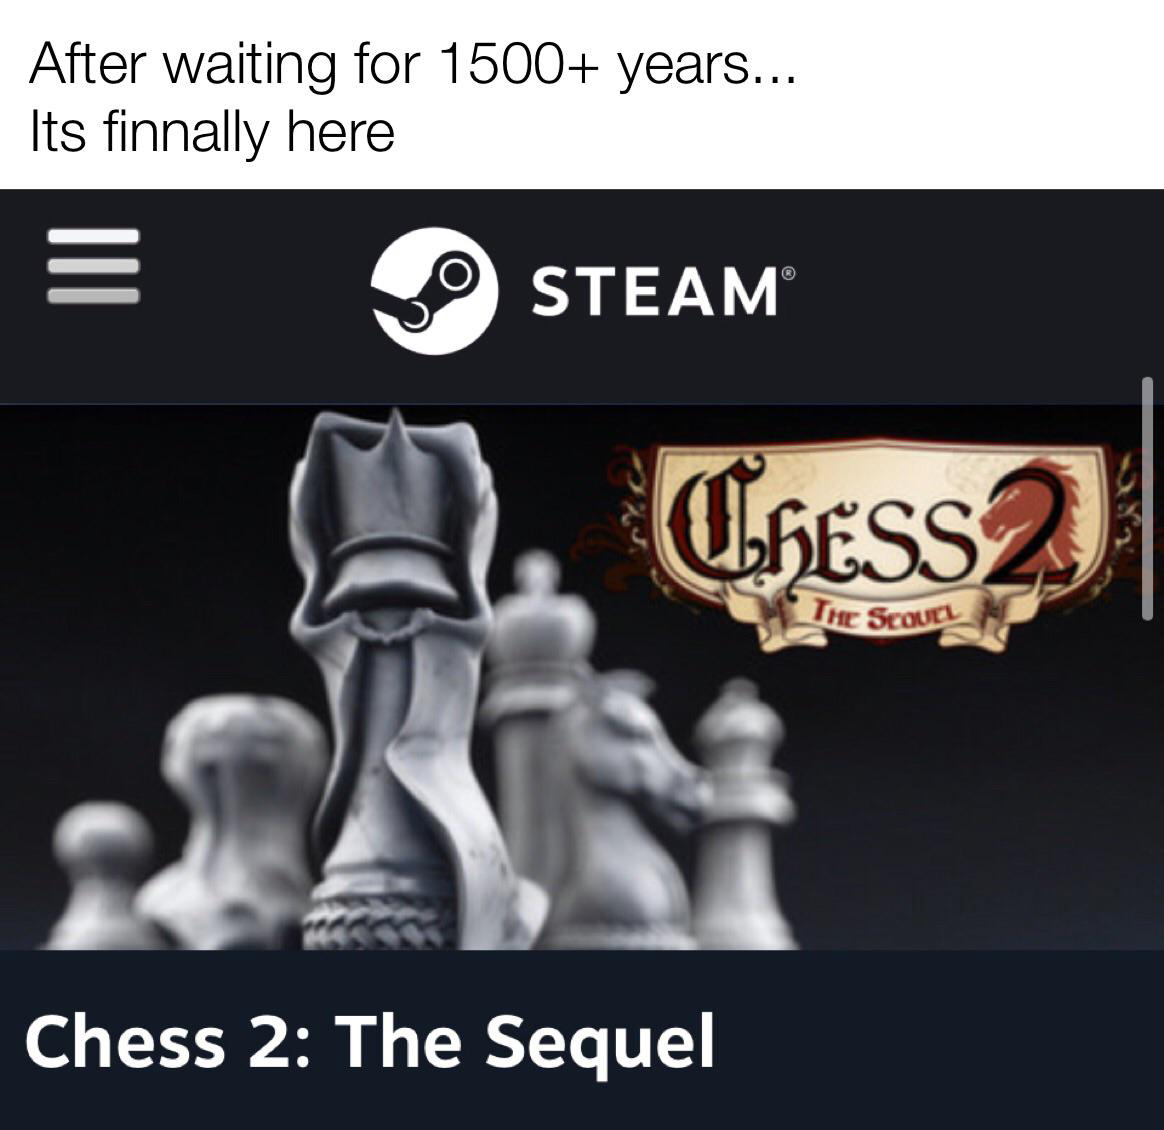 funny gaming memes - chess 2 the sequel - After waiting for 1500 years... Its finnally here Steam CHESS2 The Scouel Chess 2 The Sequel